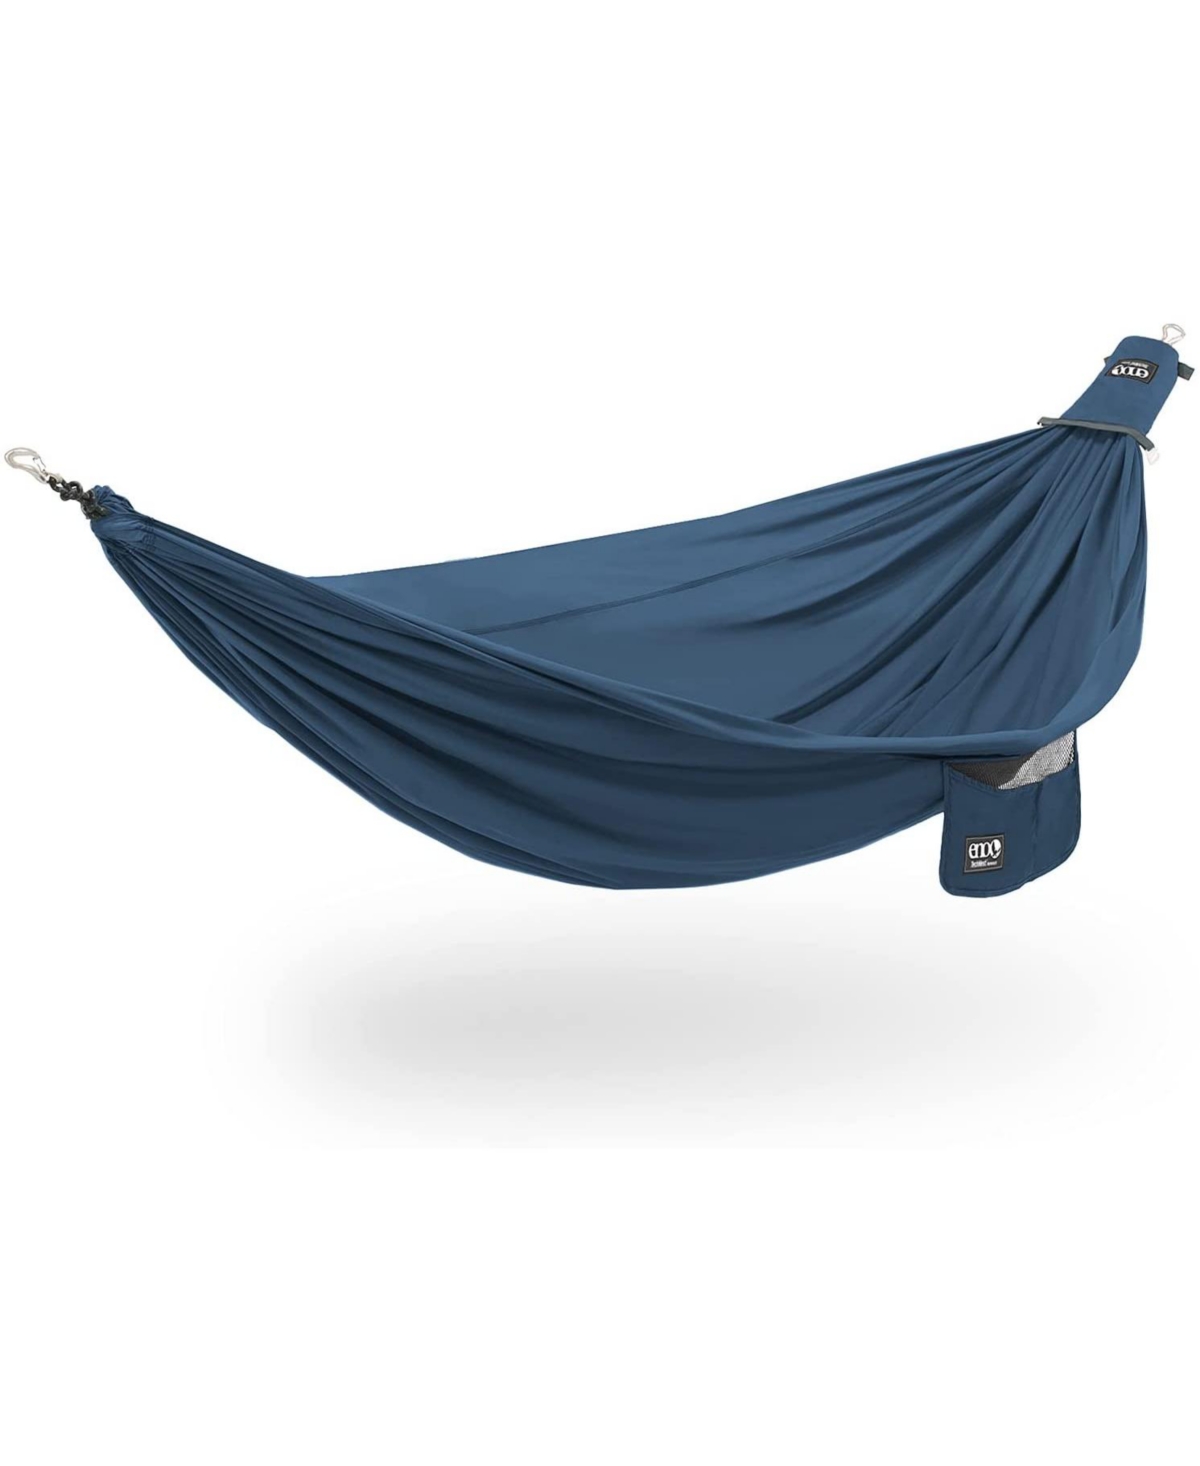 TechNest Hammock - 1 Person Portable Sleeping Hammock - Overnight Comfort for Camping, Hiking, Backpacking, Travel, Festival, Beach, or Backcountr